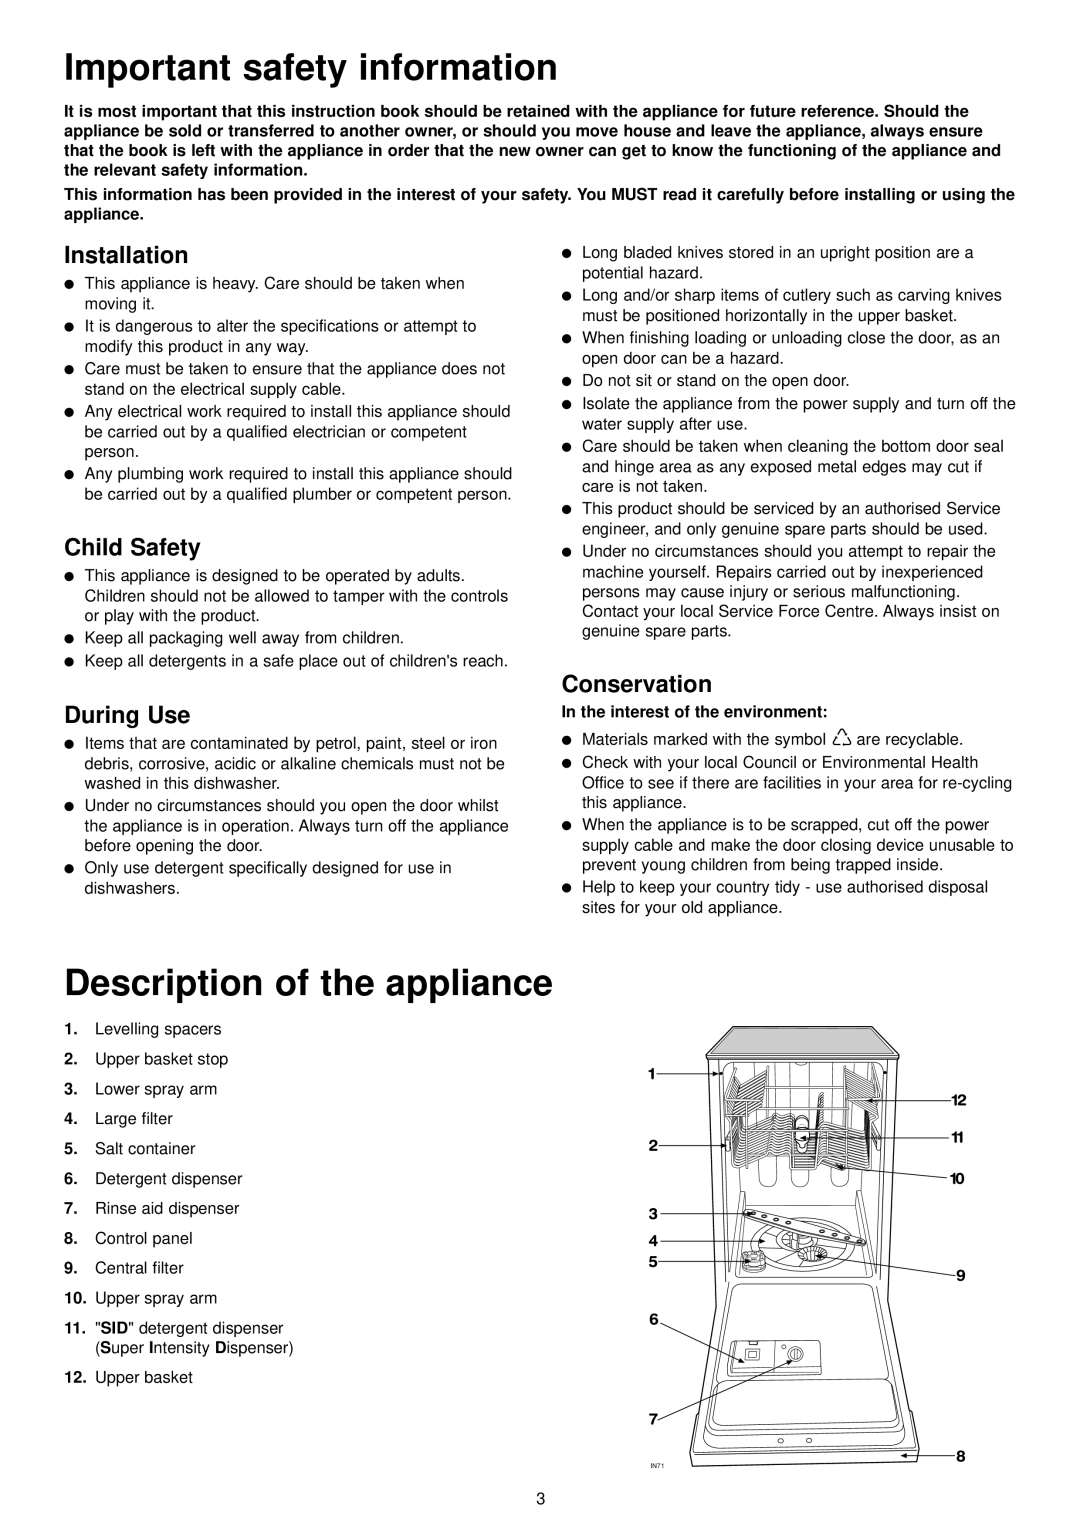 Zanussi ZDT 5052 manual Important safety information, Description of the appliance, Installation, Child Safety, During Use 